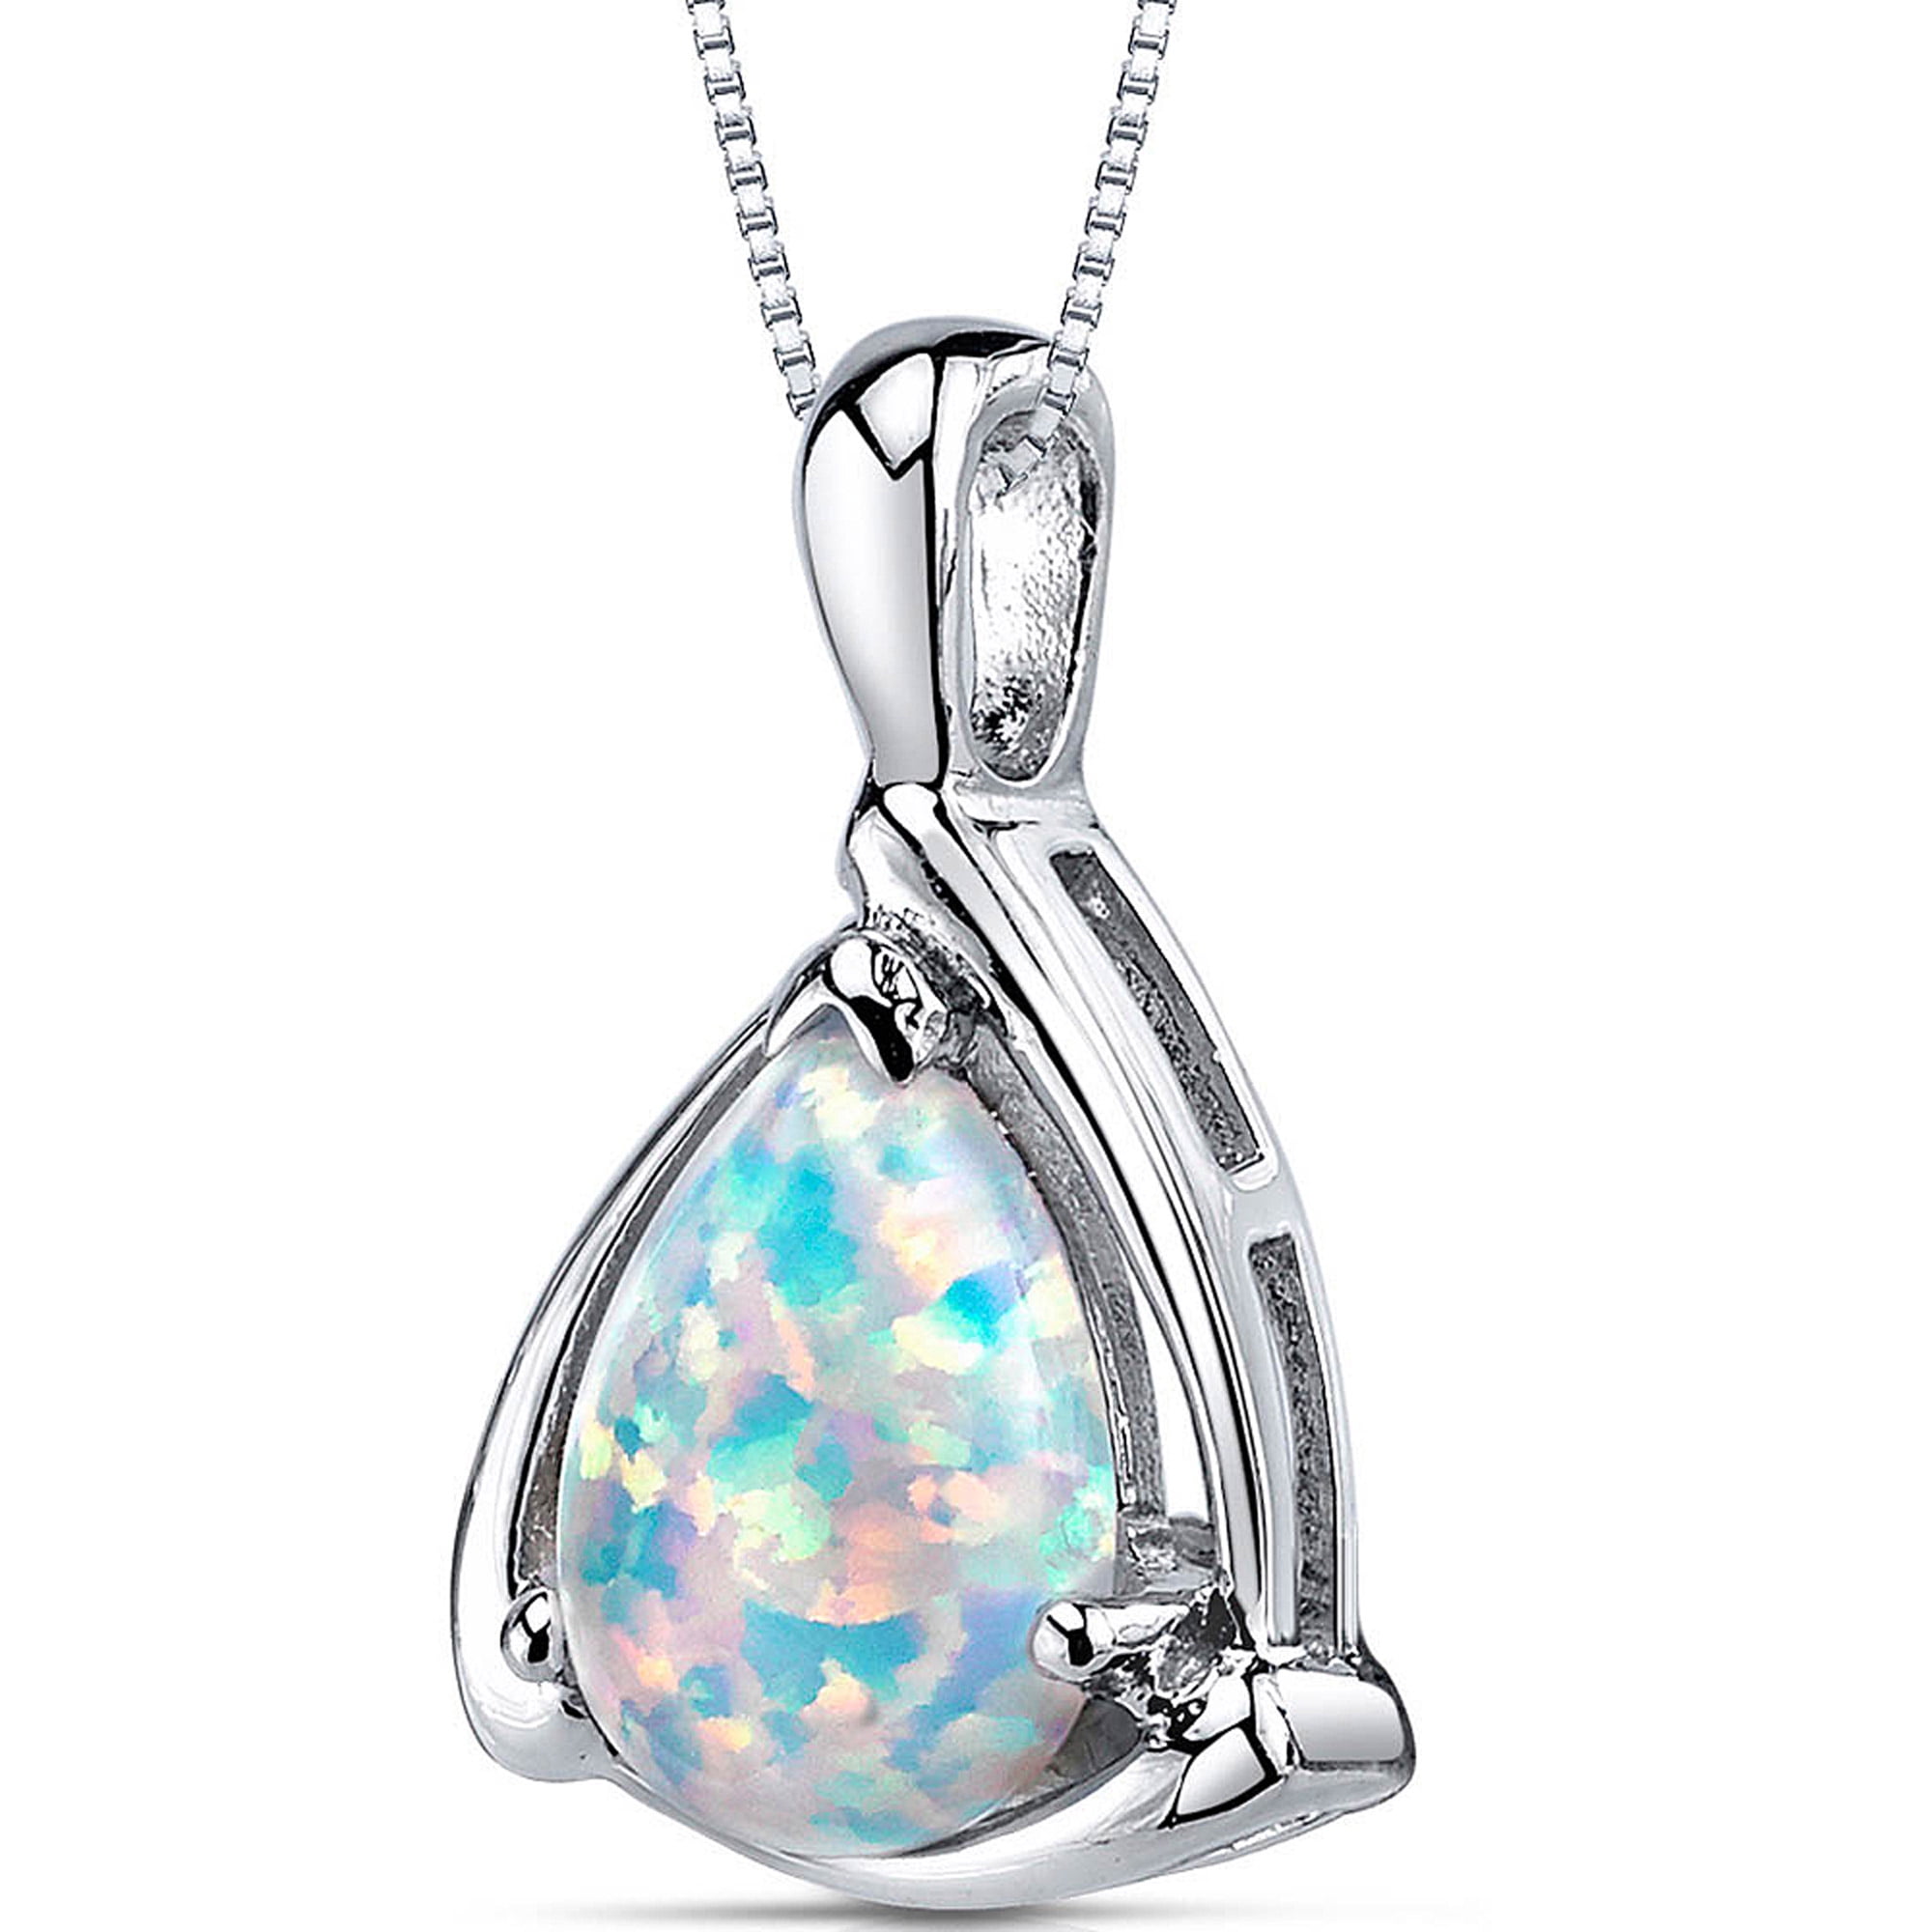 Stunning White Opal Pear Shaped Pendant White Sapphire Accents Sterling Sterling 